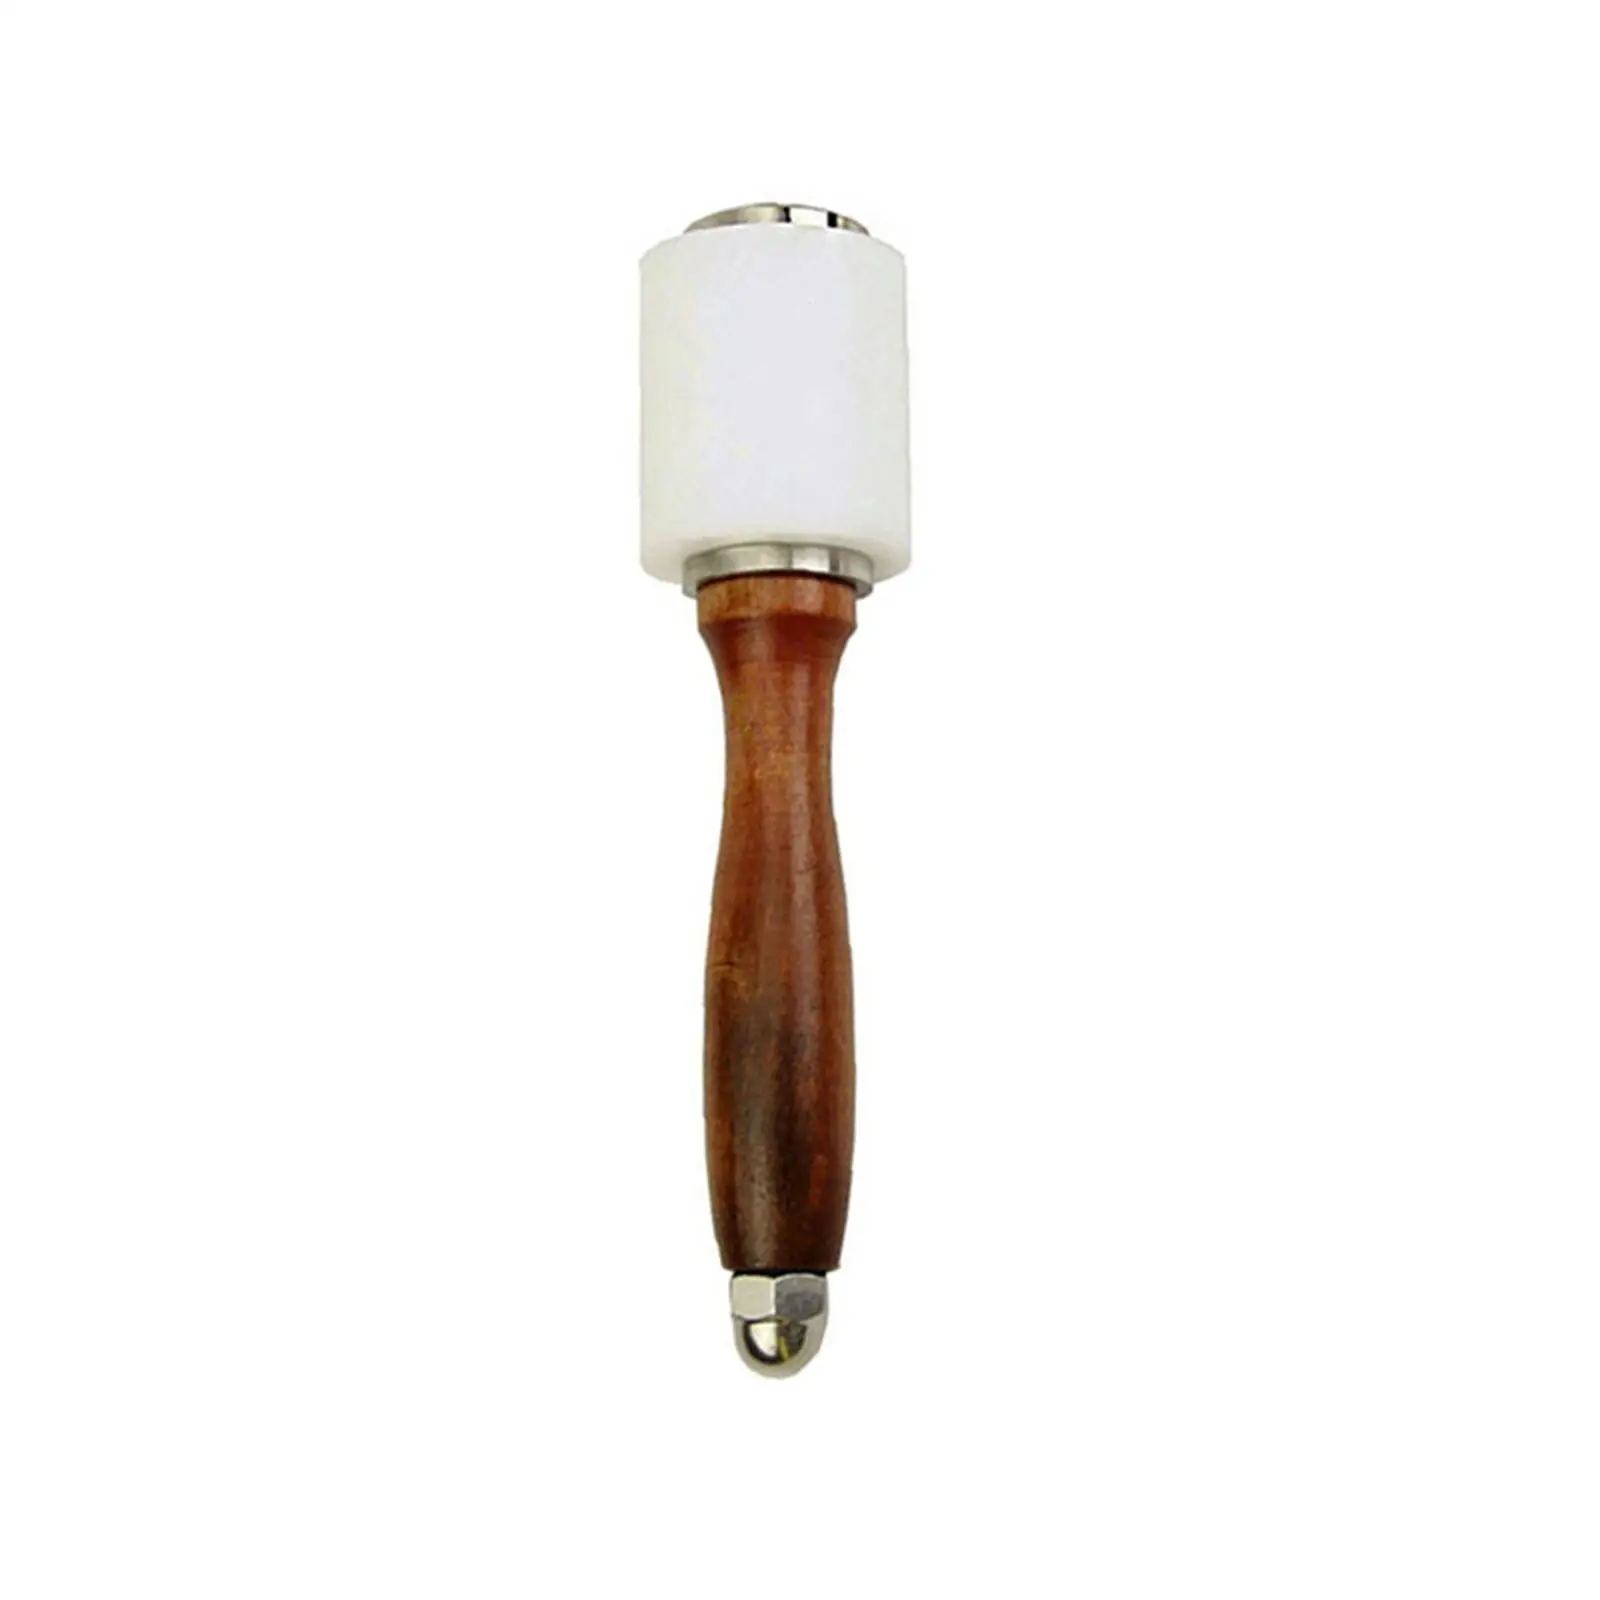 Leather Carving Hammer Printing Hammer DIY Cutting Wooden Handle Leather Craft Mauls DIY Leathercraft Mallet Accessories